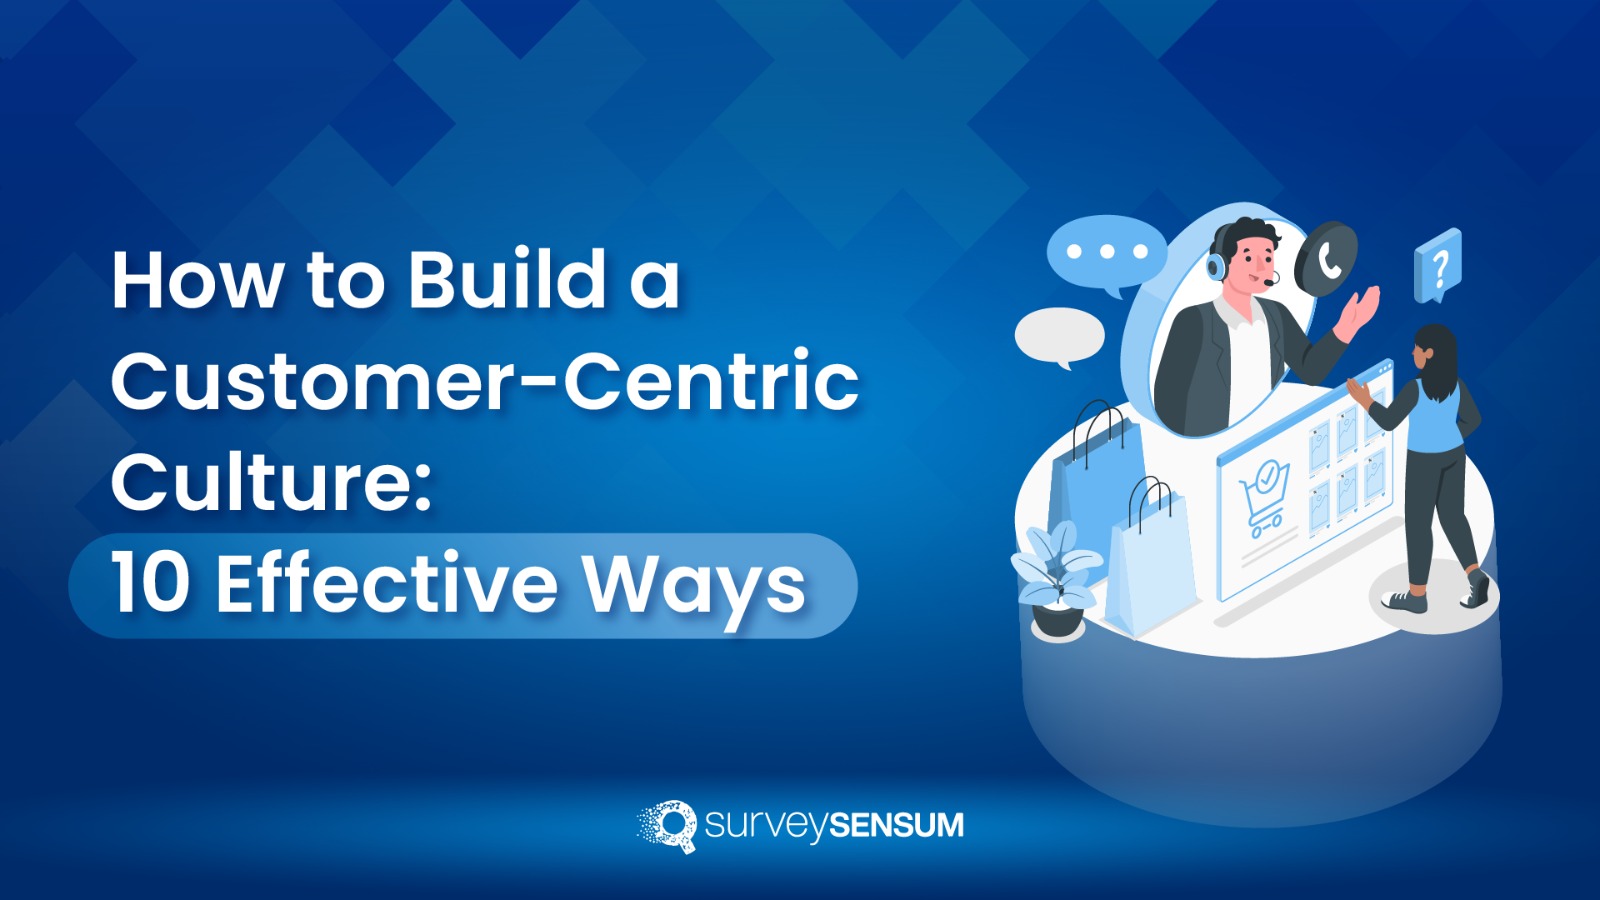 Top 10 Effective Ways to Build a Customer-Centric Culture